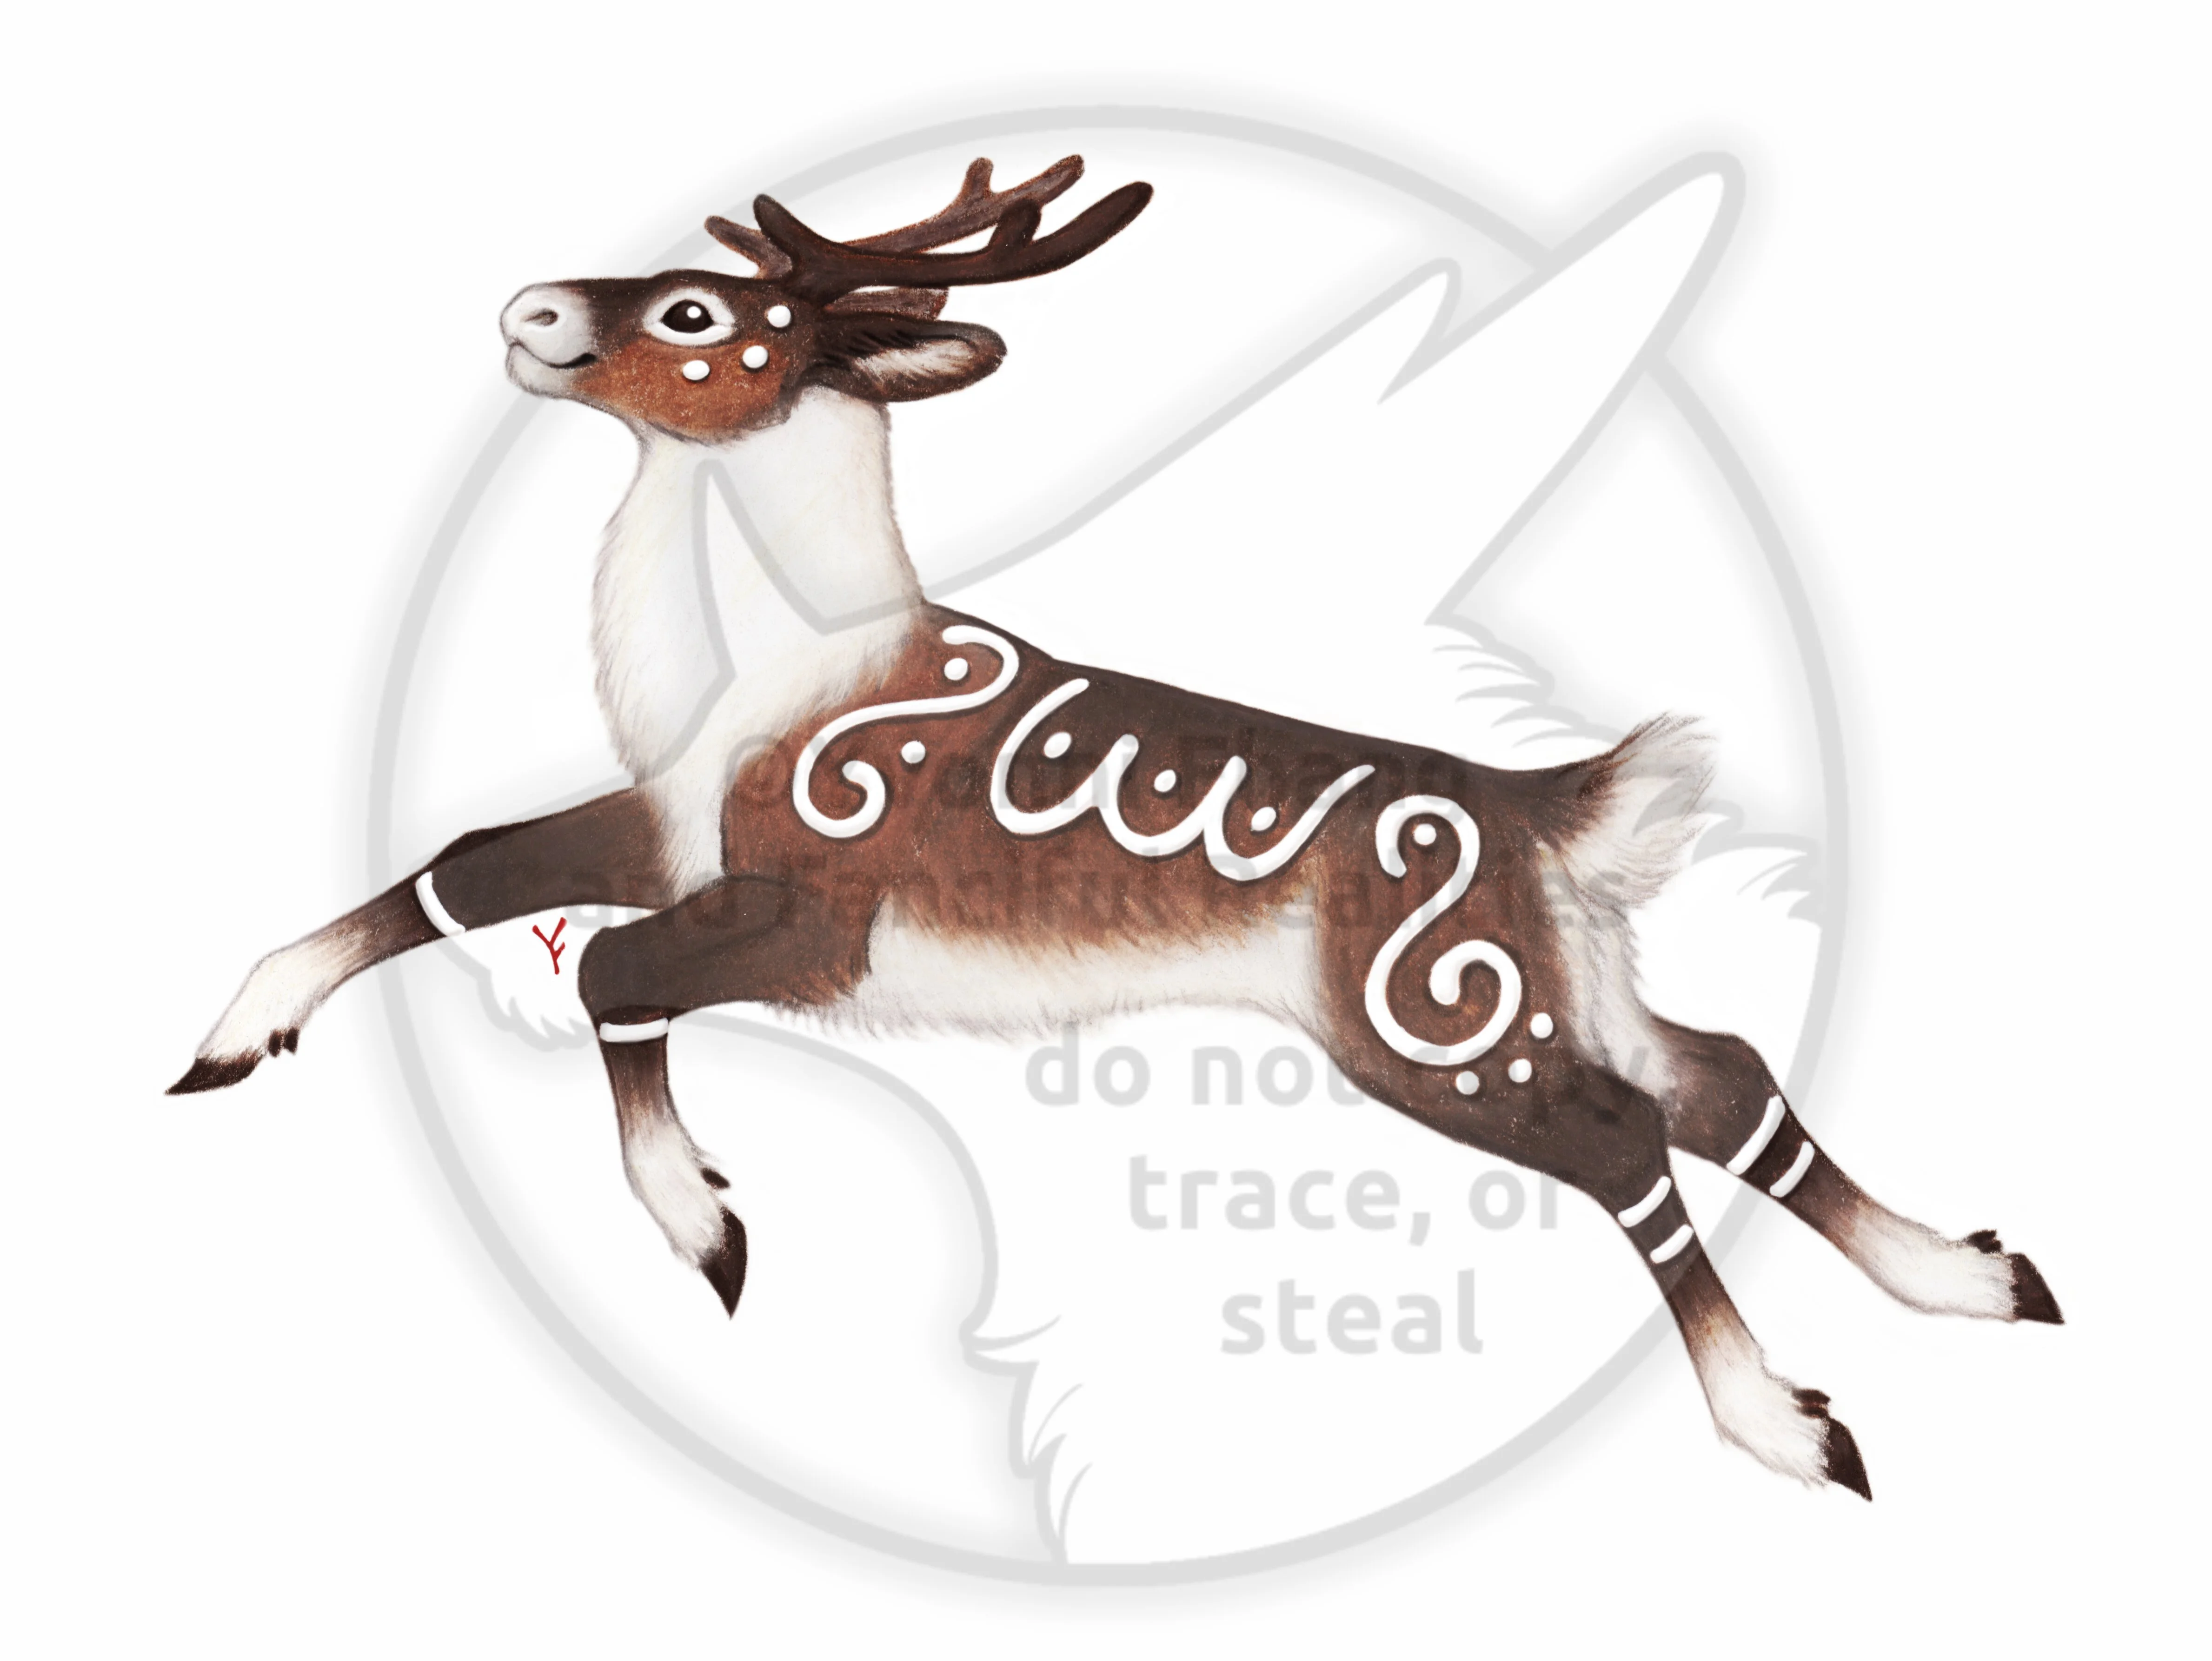 A holiday hybrid, reindeer with old-fashioned gingerbread cookie.